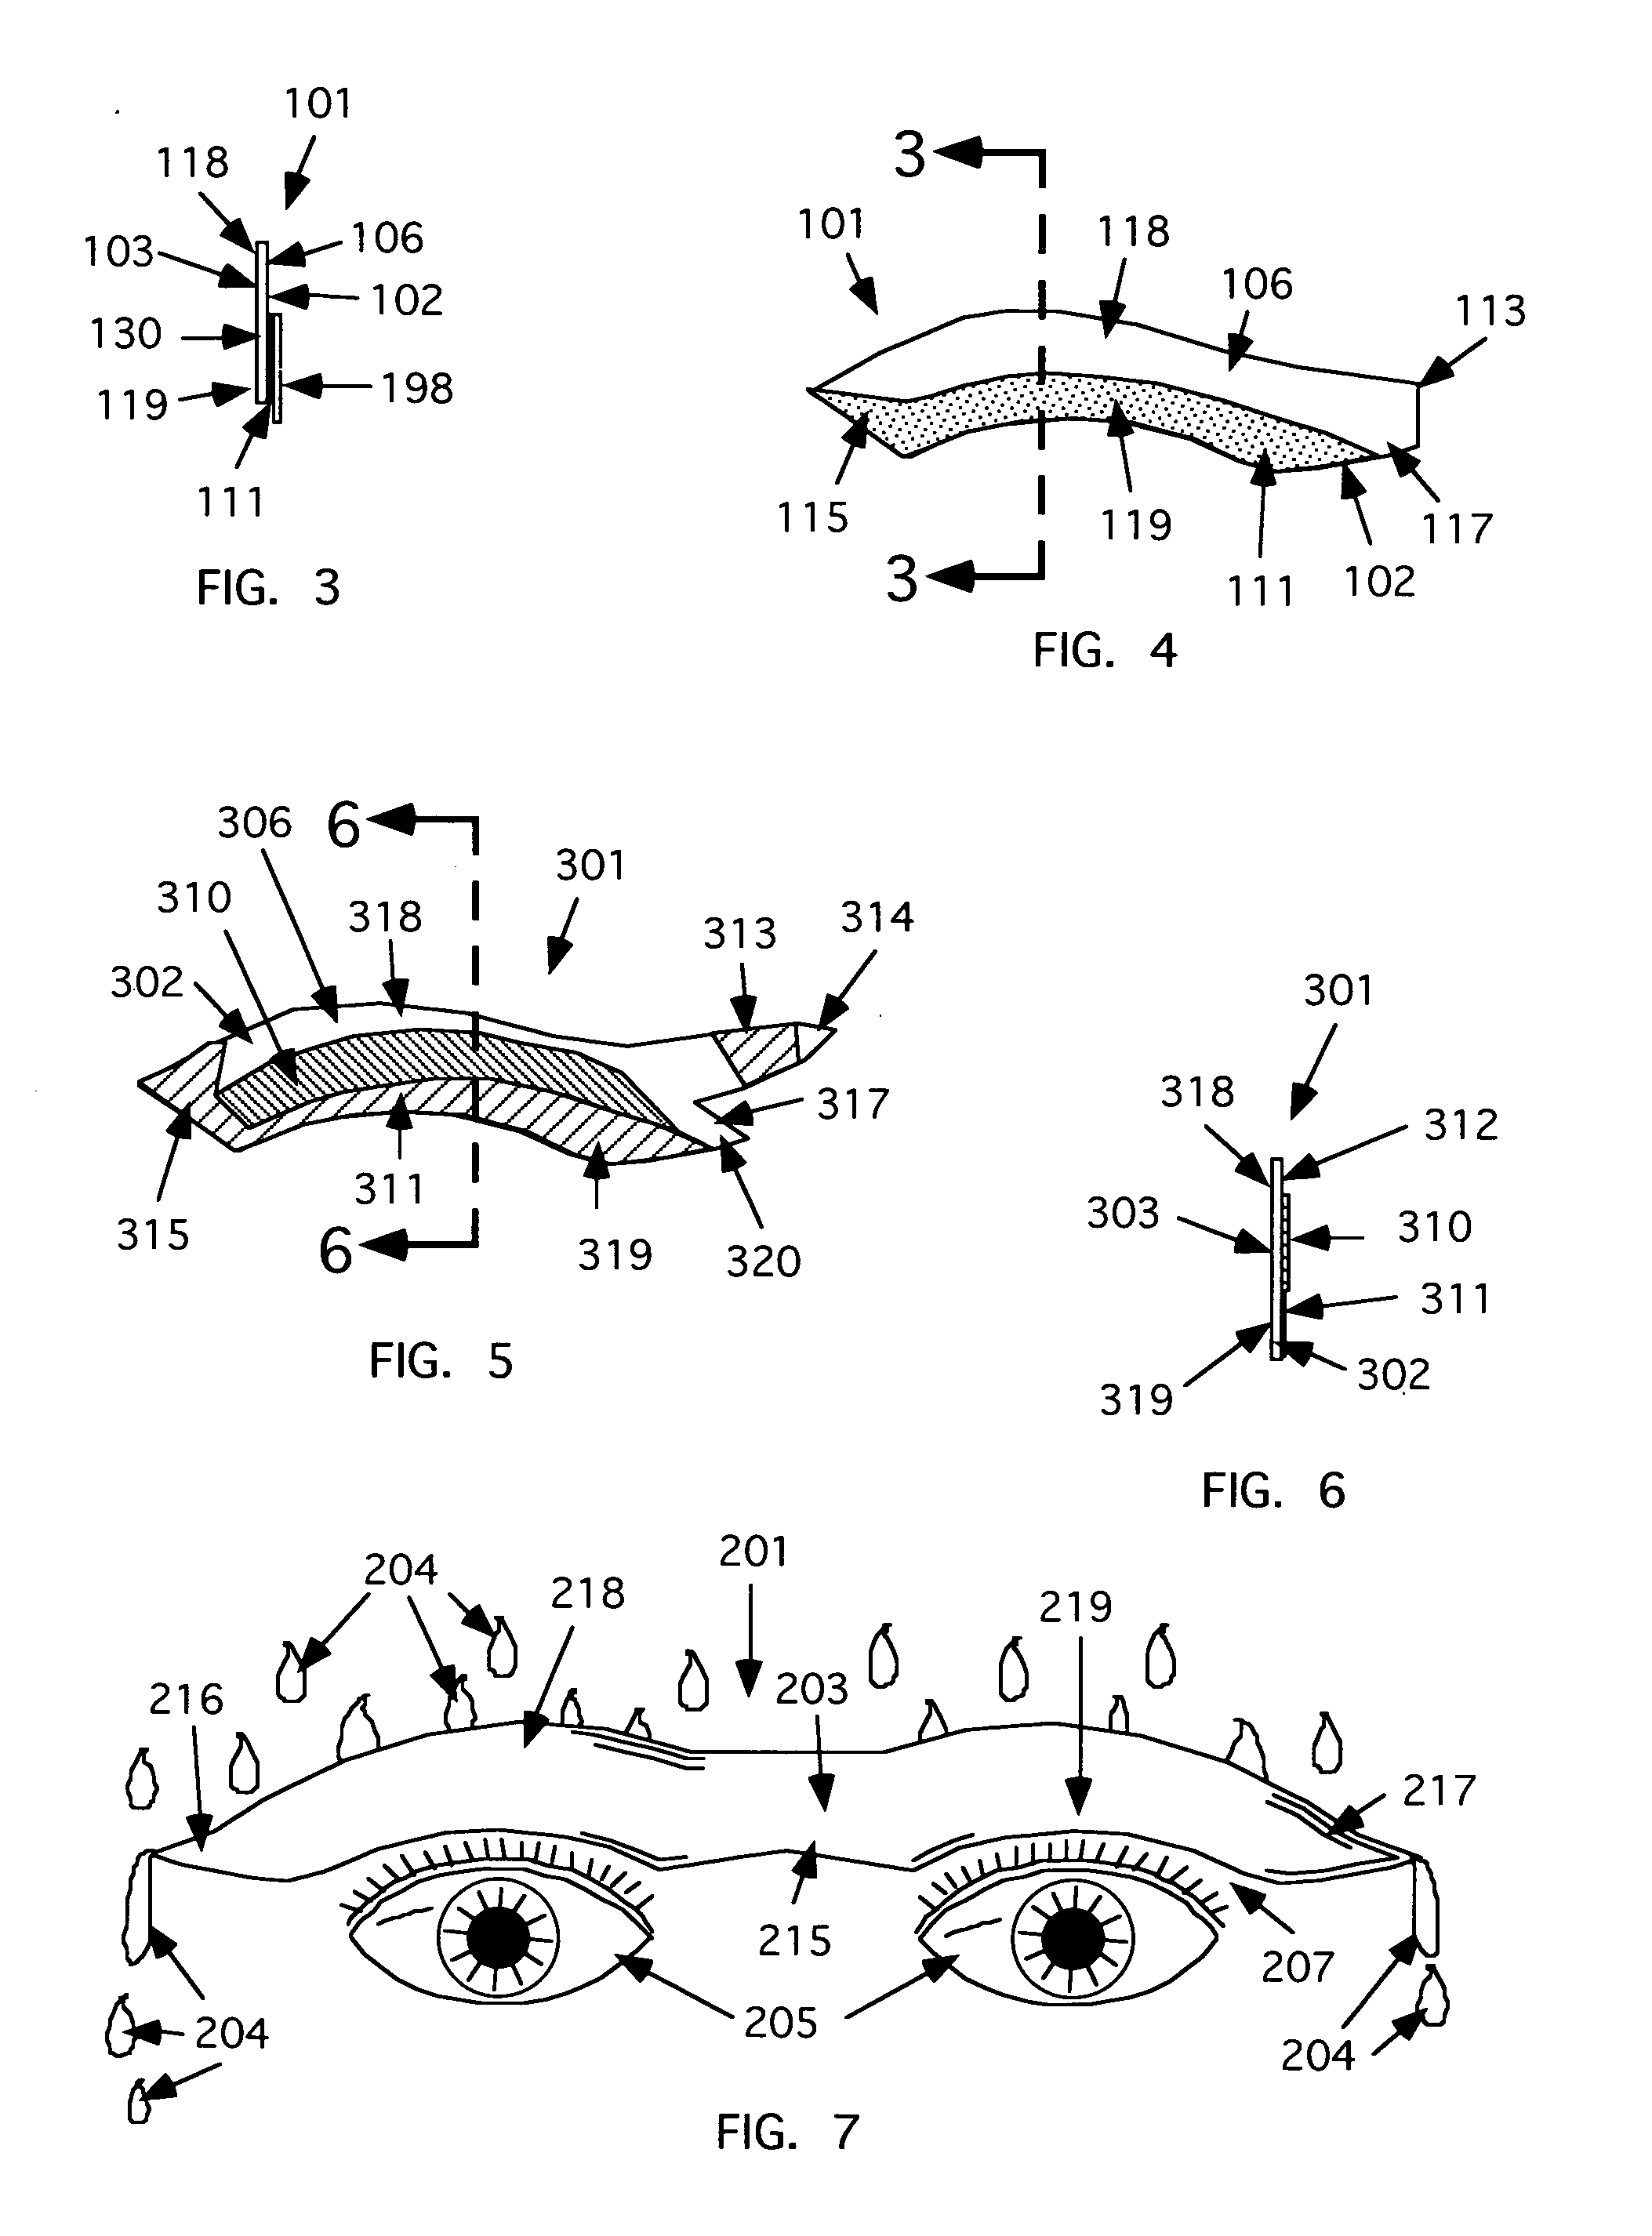 Method and apparatus for diverting sweat, liquid, moisture, or the like from an eye